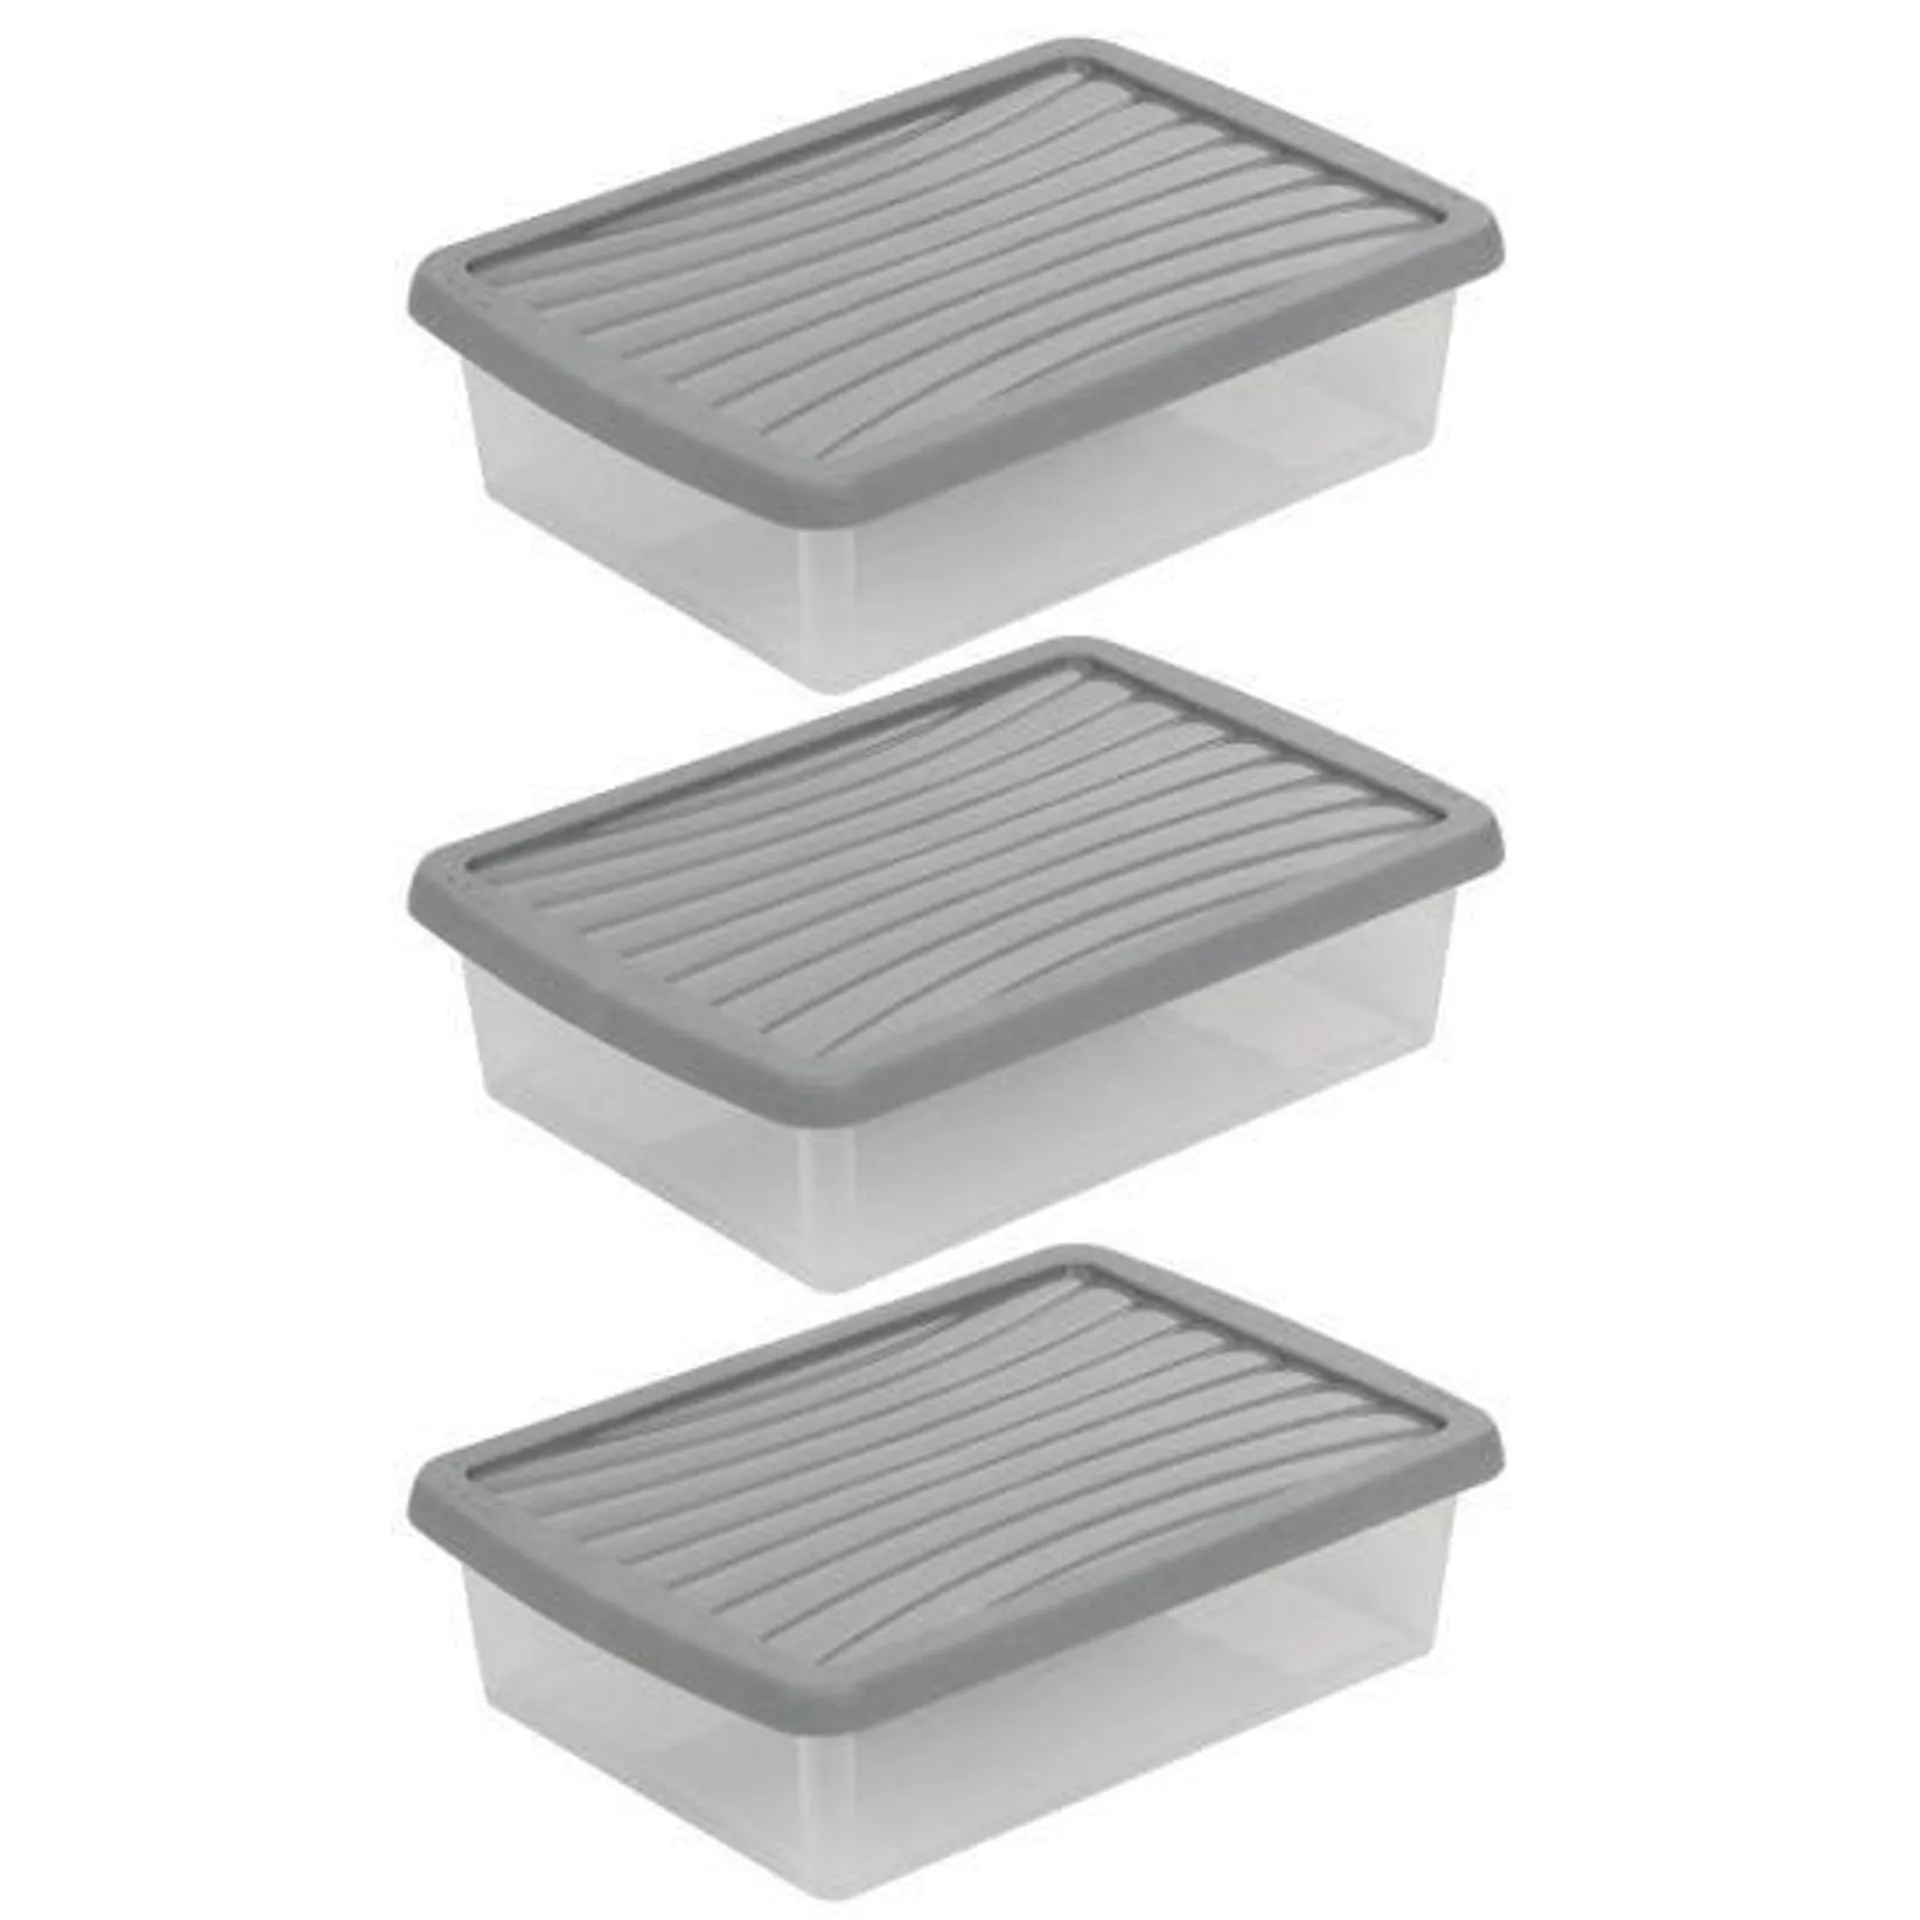 Wham Plastic Storage Boxes 8 Litre Pack of 3 Clear with Grey Lid